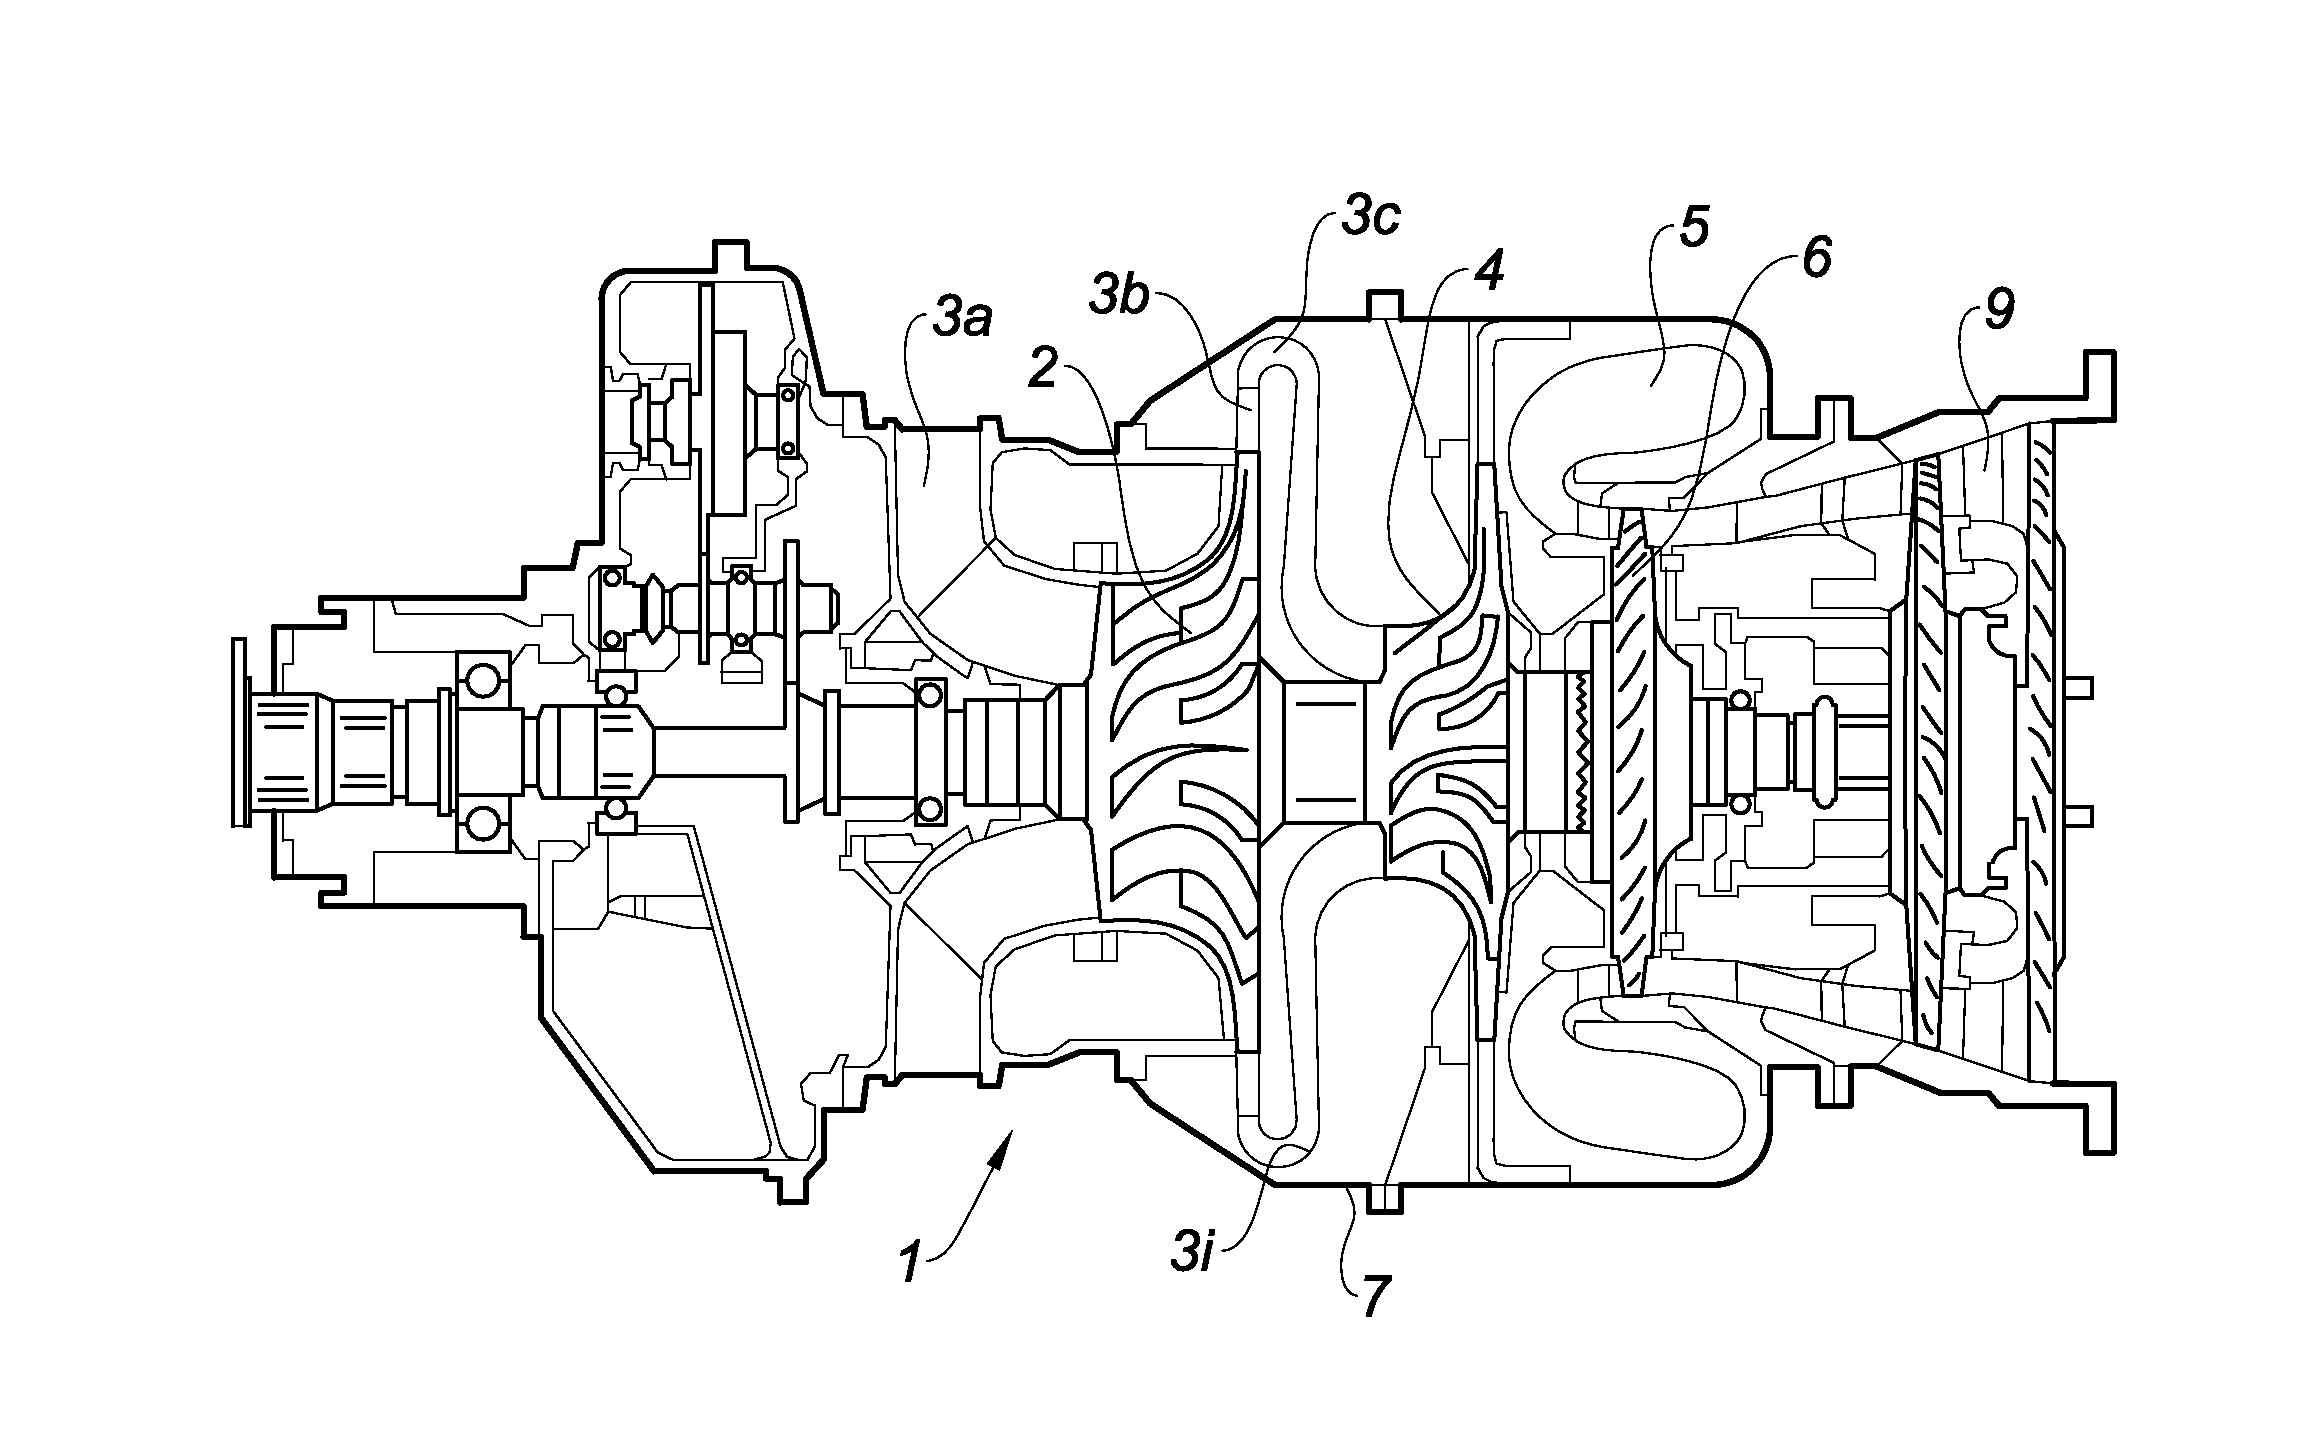 Turbomachine comprising a casing wear indicator